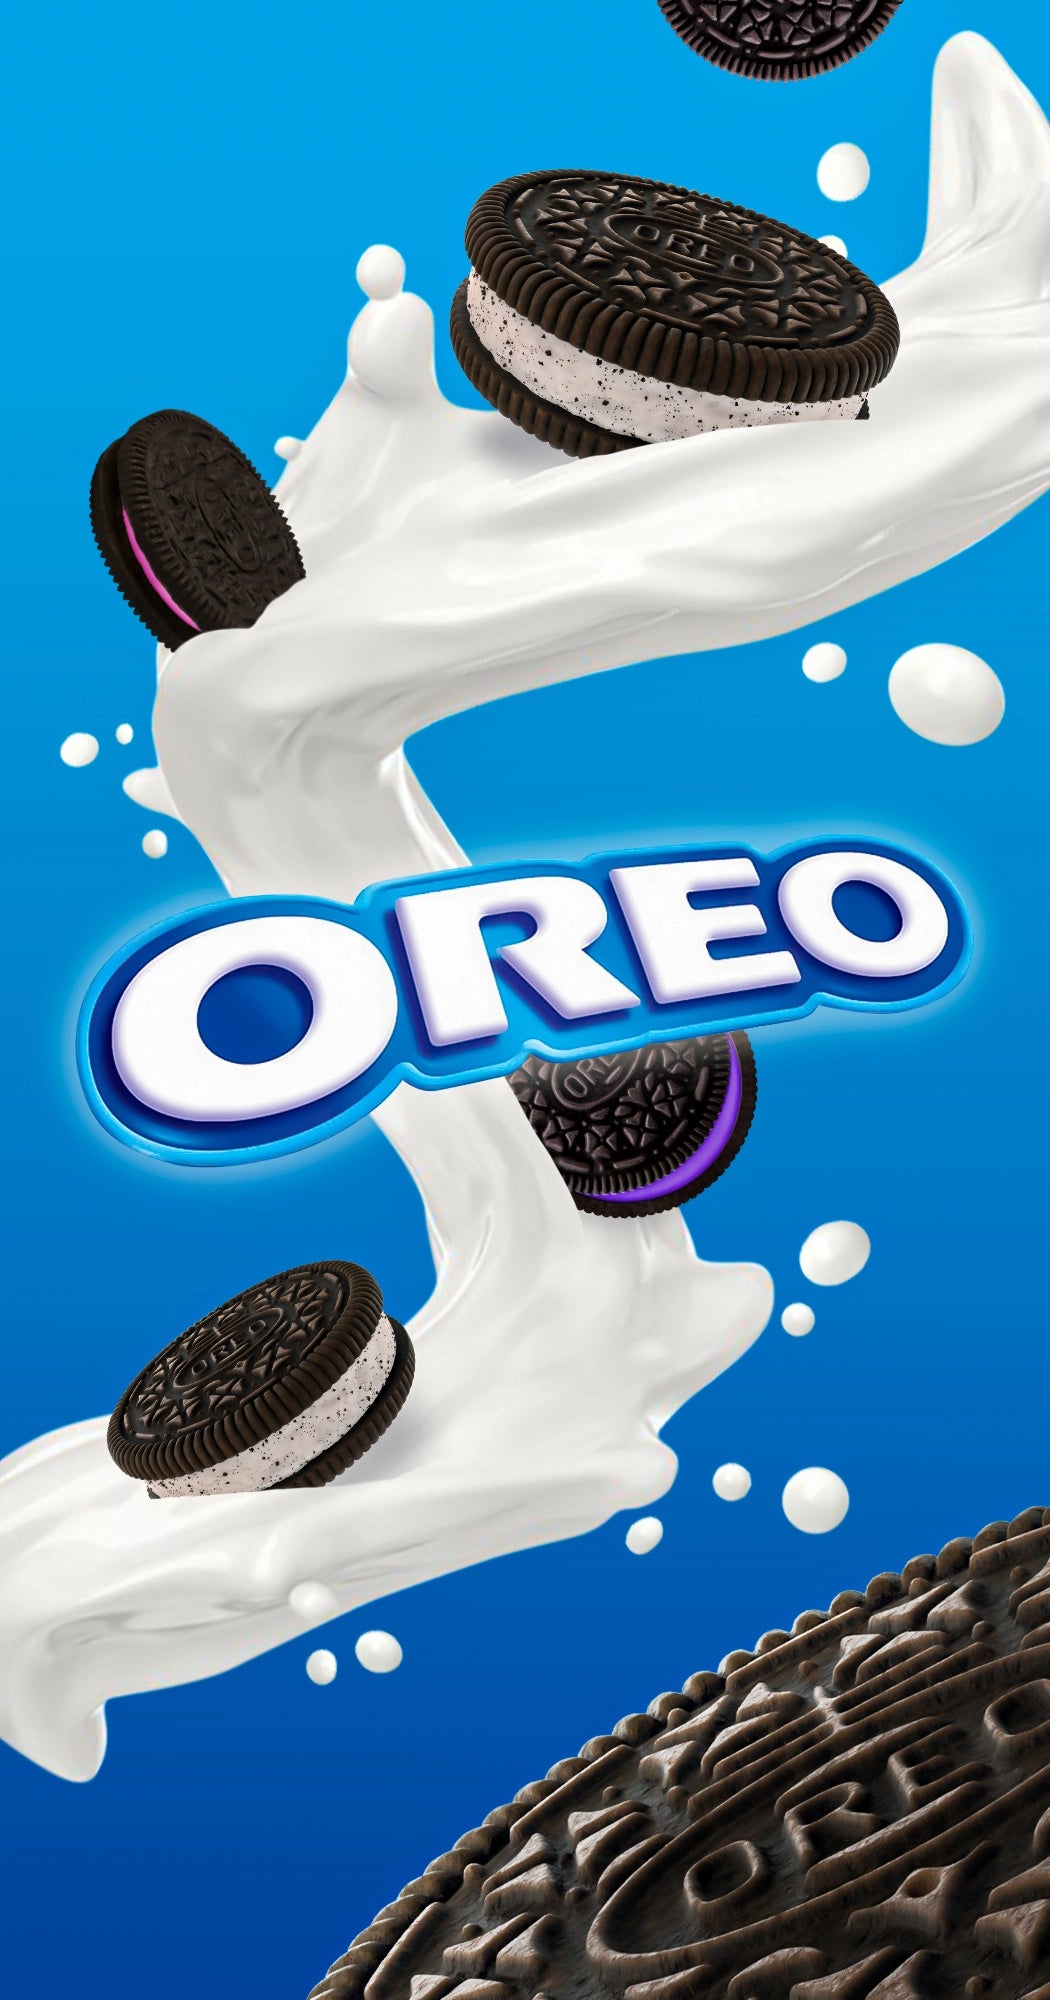 Oreo in collection mobile banner